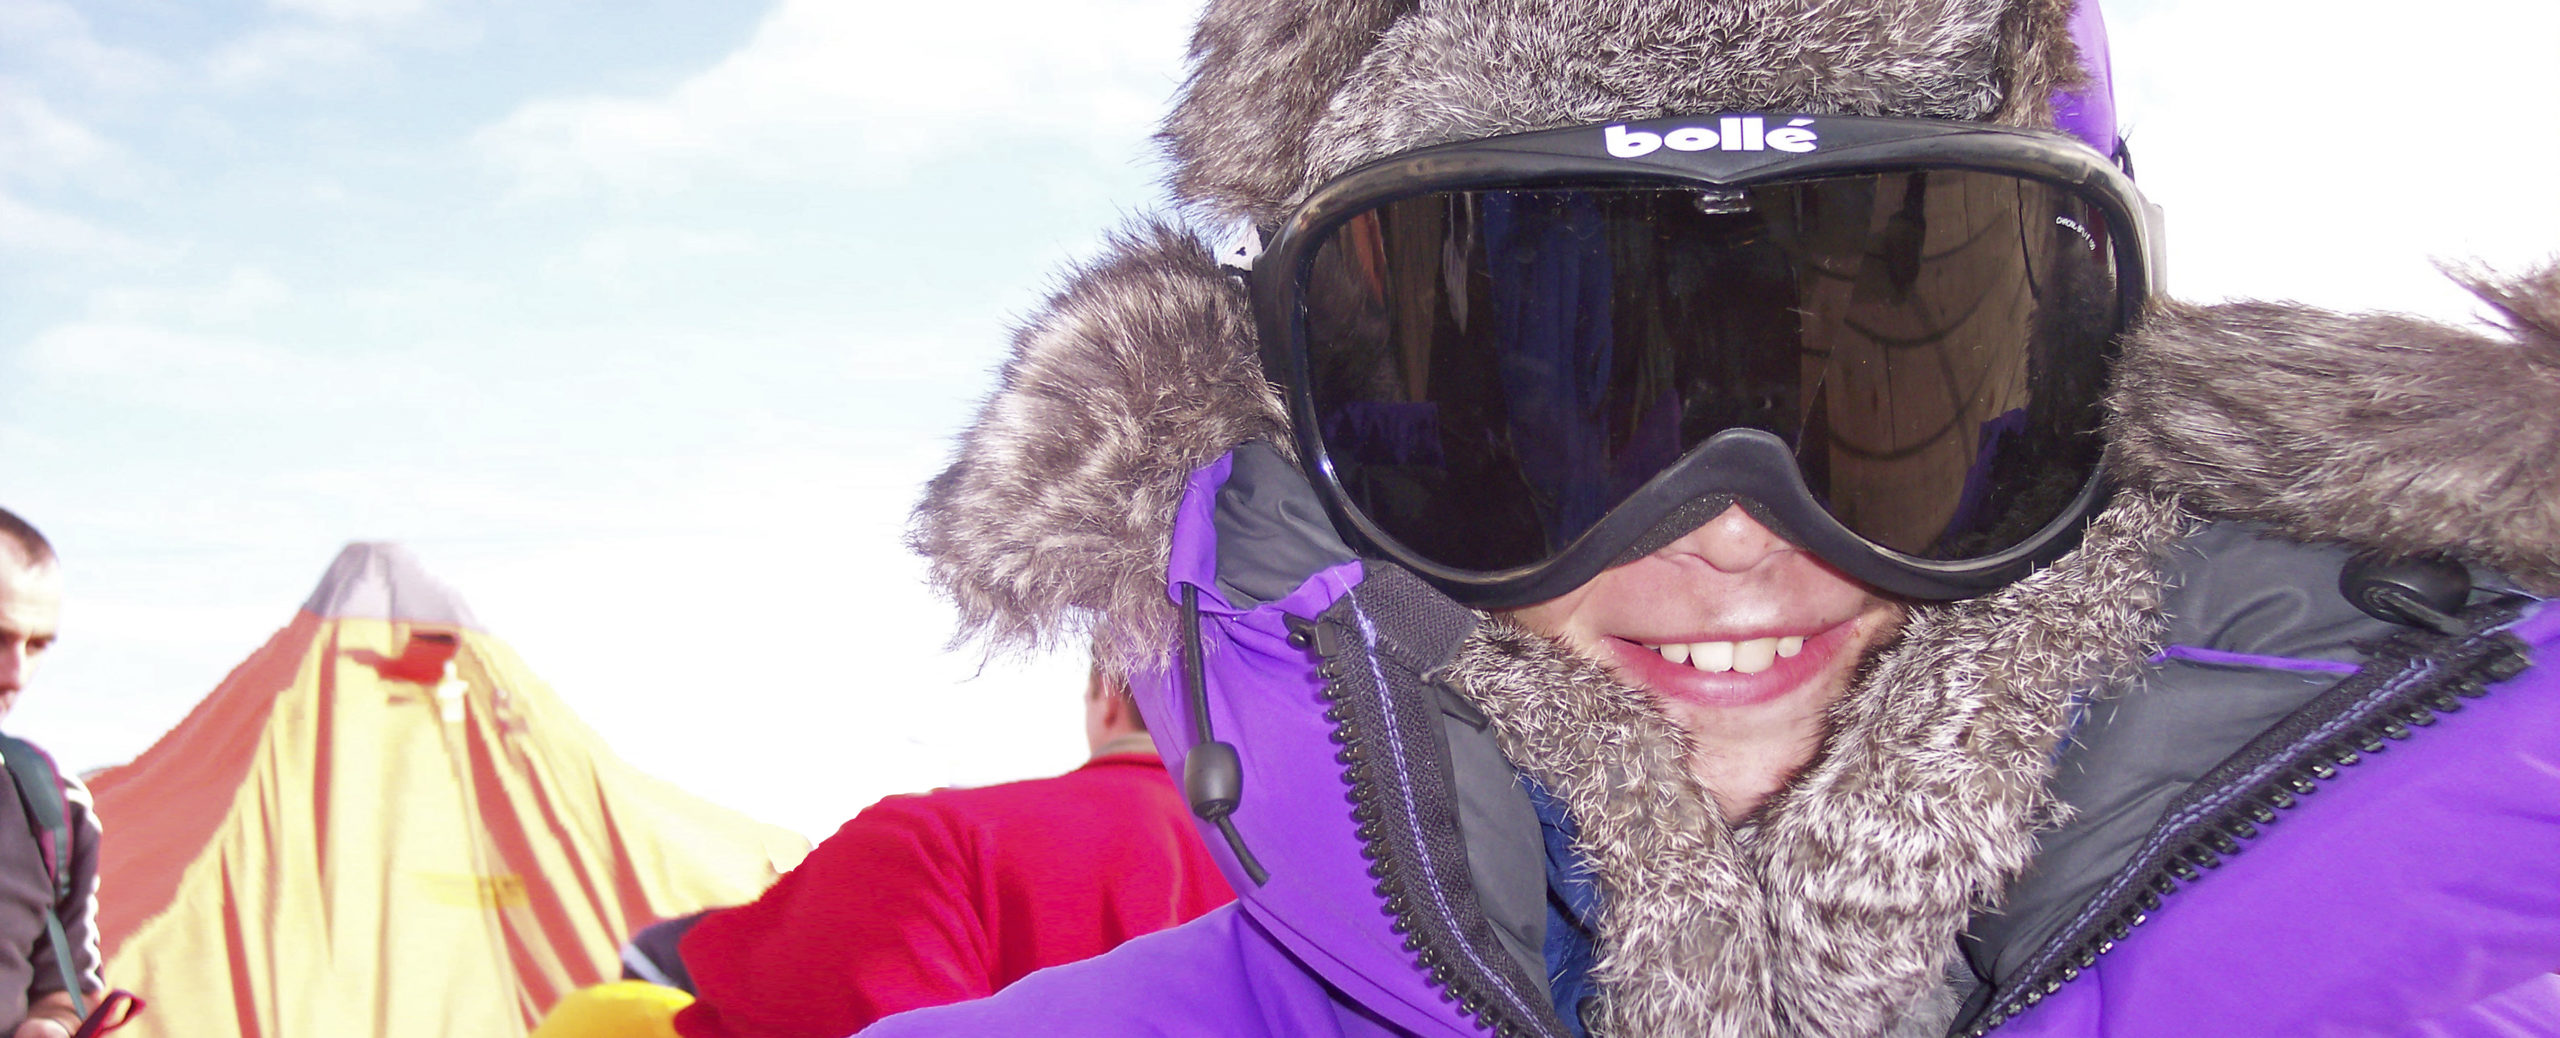 A person wearing winter clothing and goggles looking into the camera